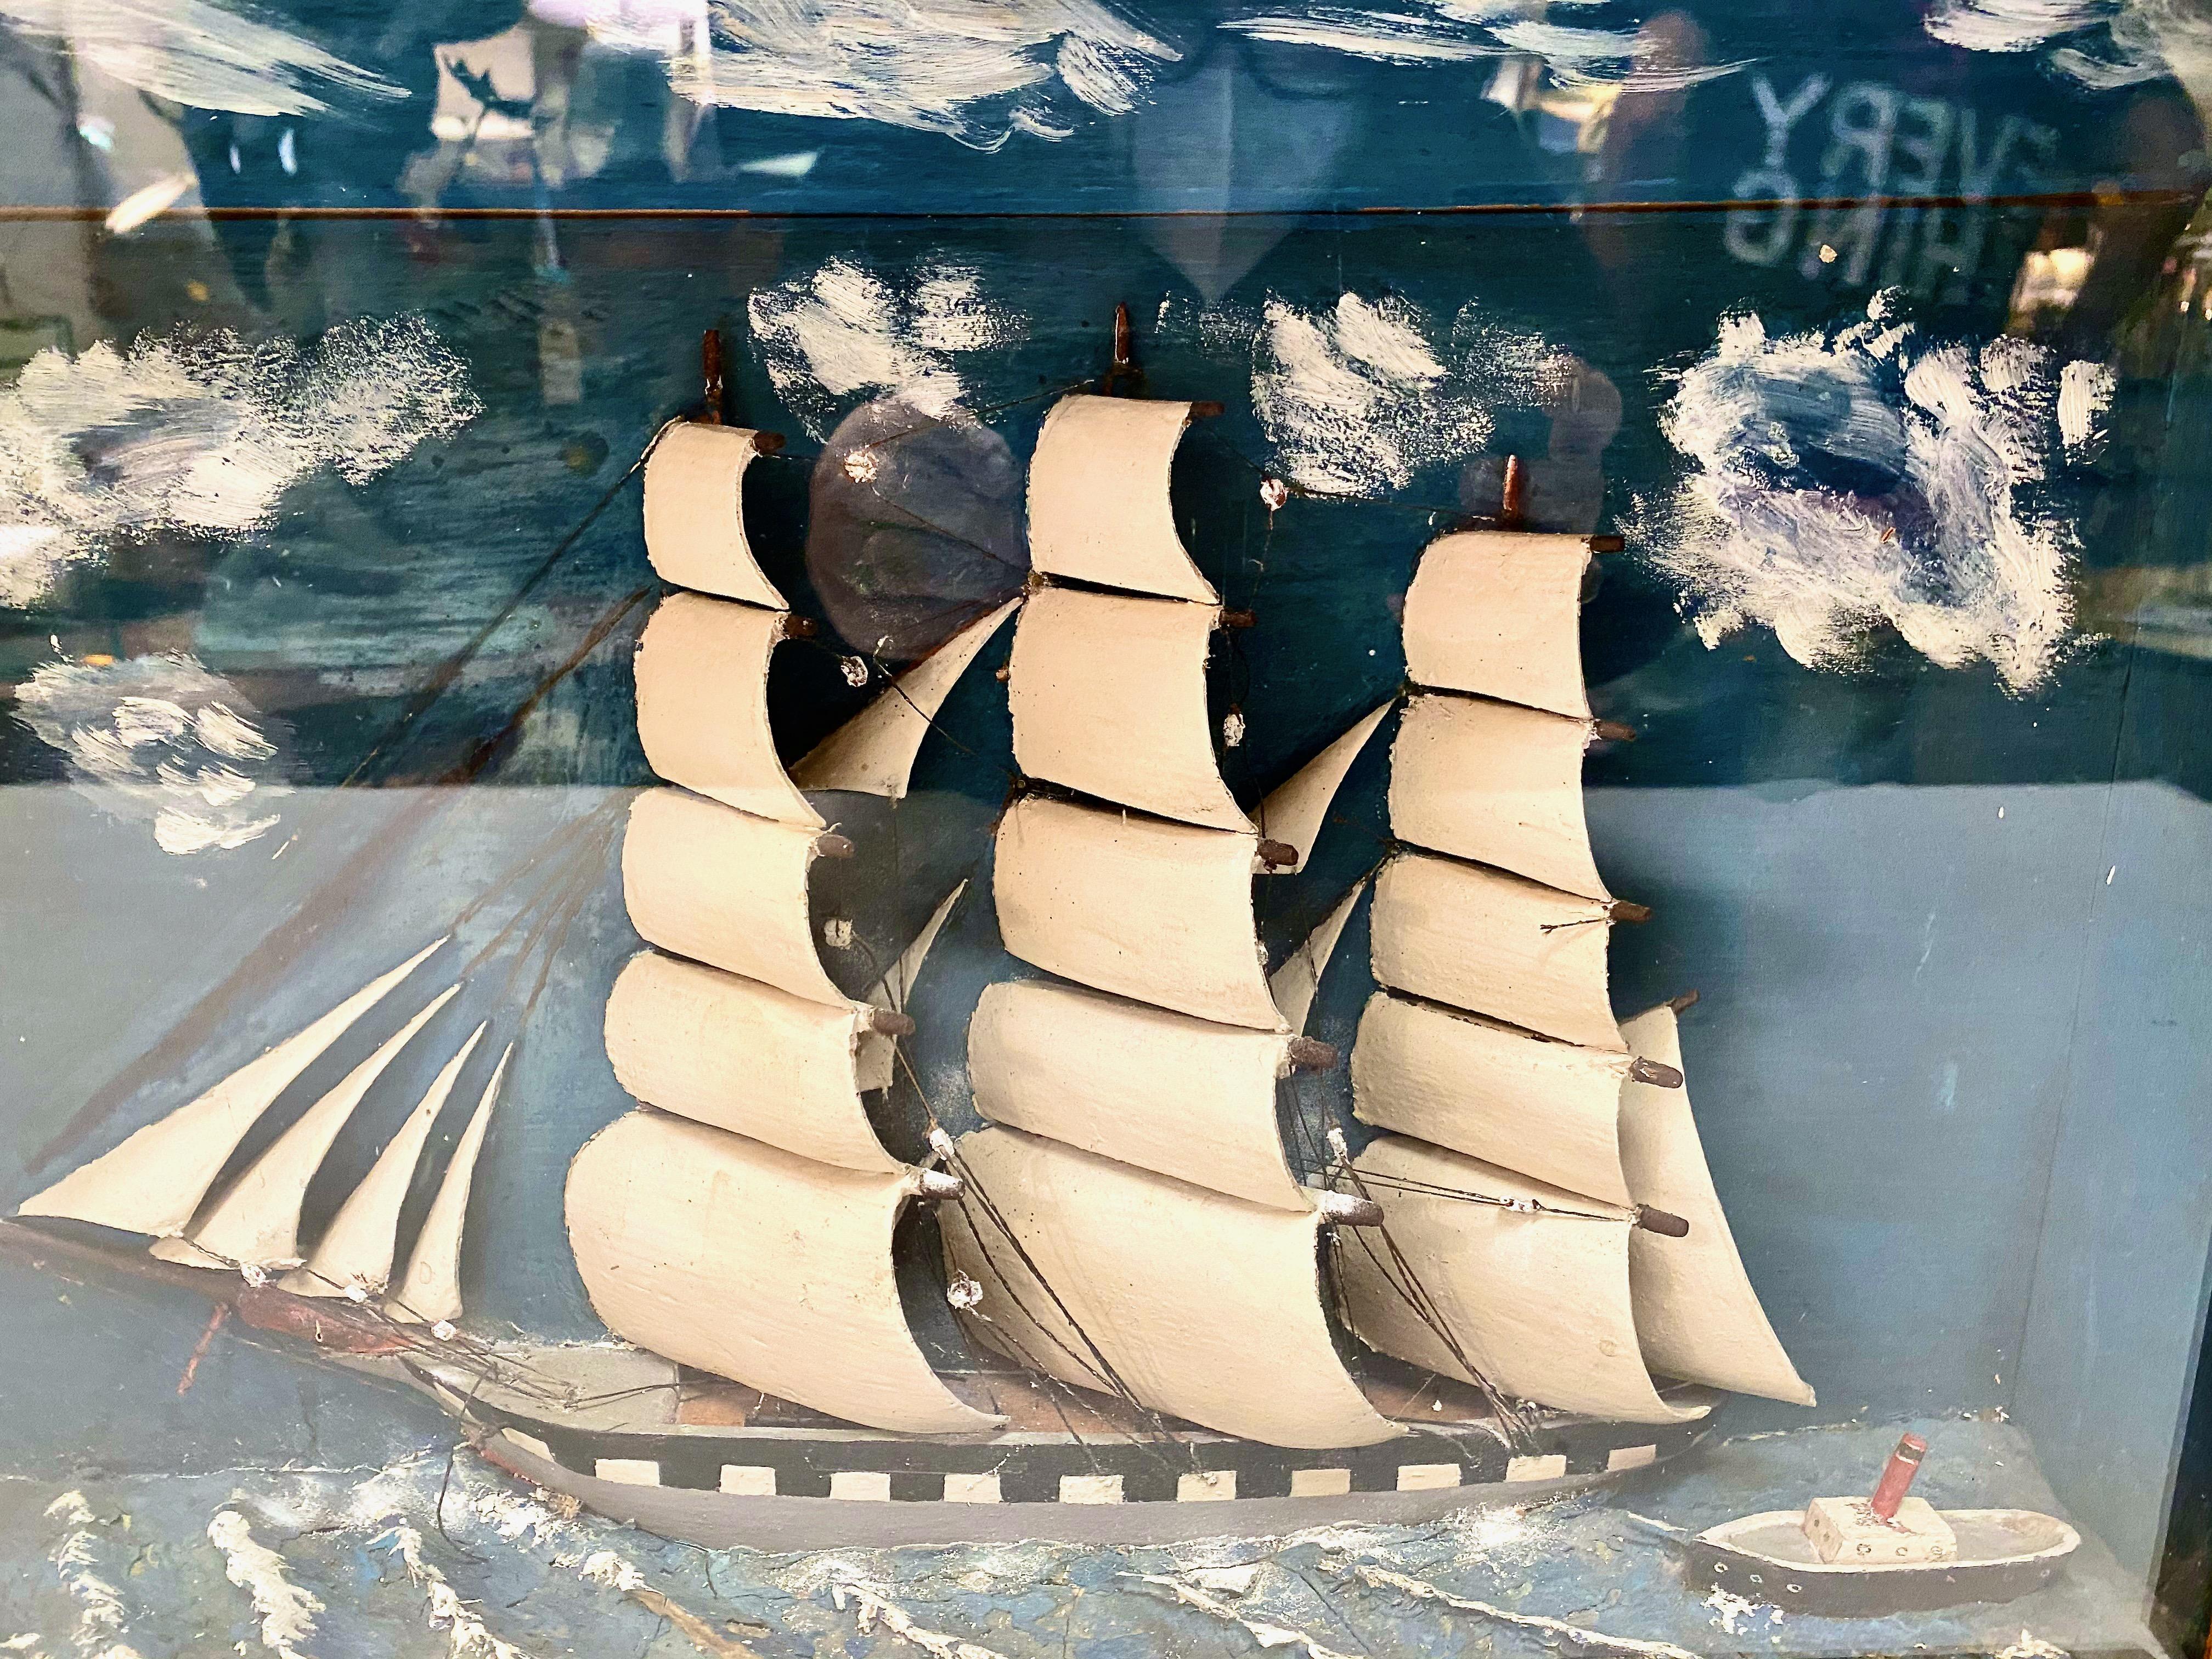 This is a beautifully detailed diorama or shadow box of a late 19th century schooner and tug boat.